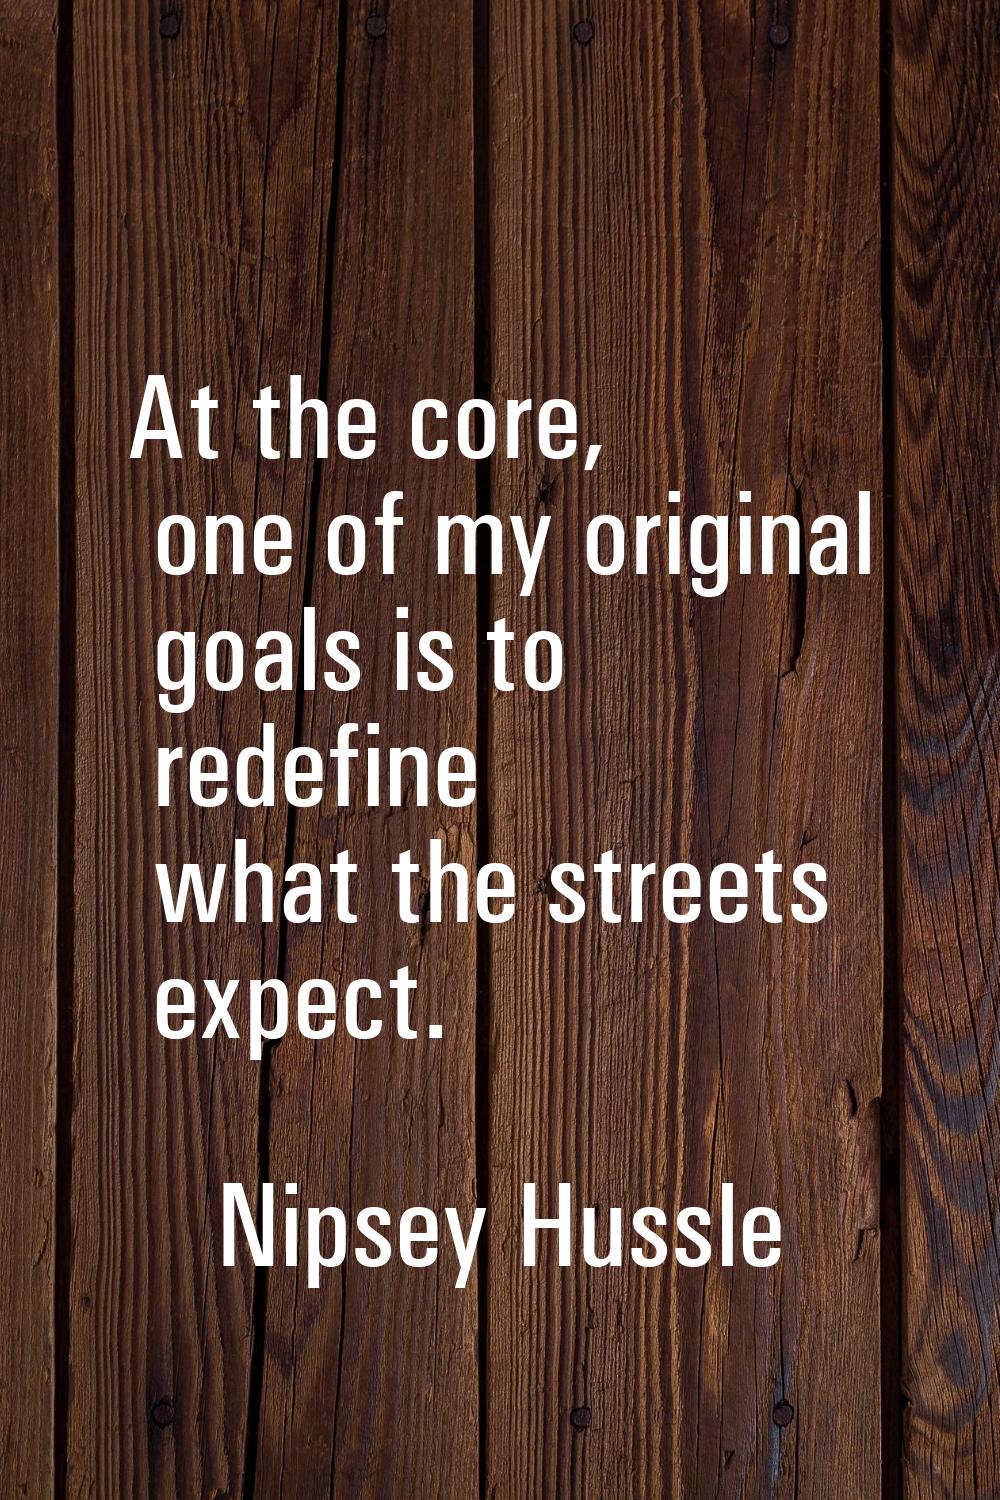 At the core, one of my original goals is to redefine what the streets expect.